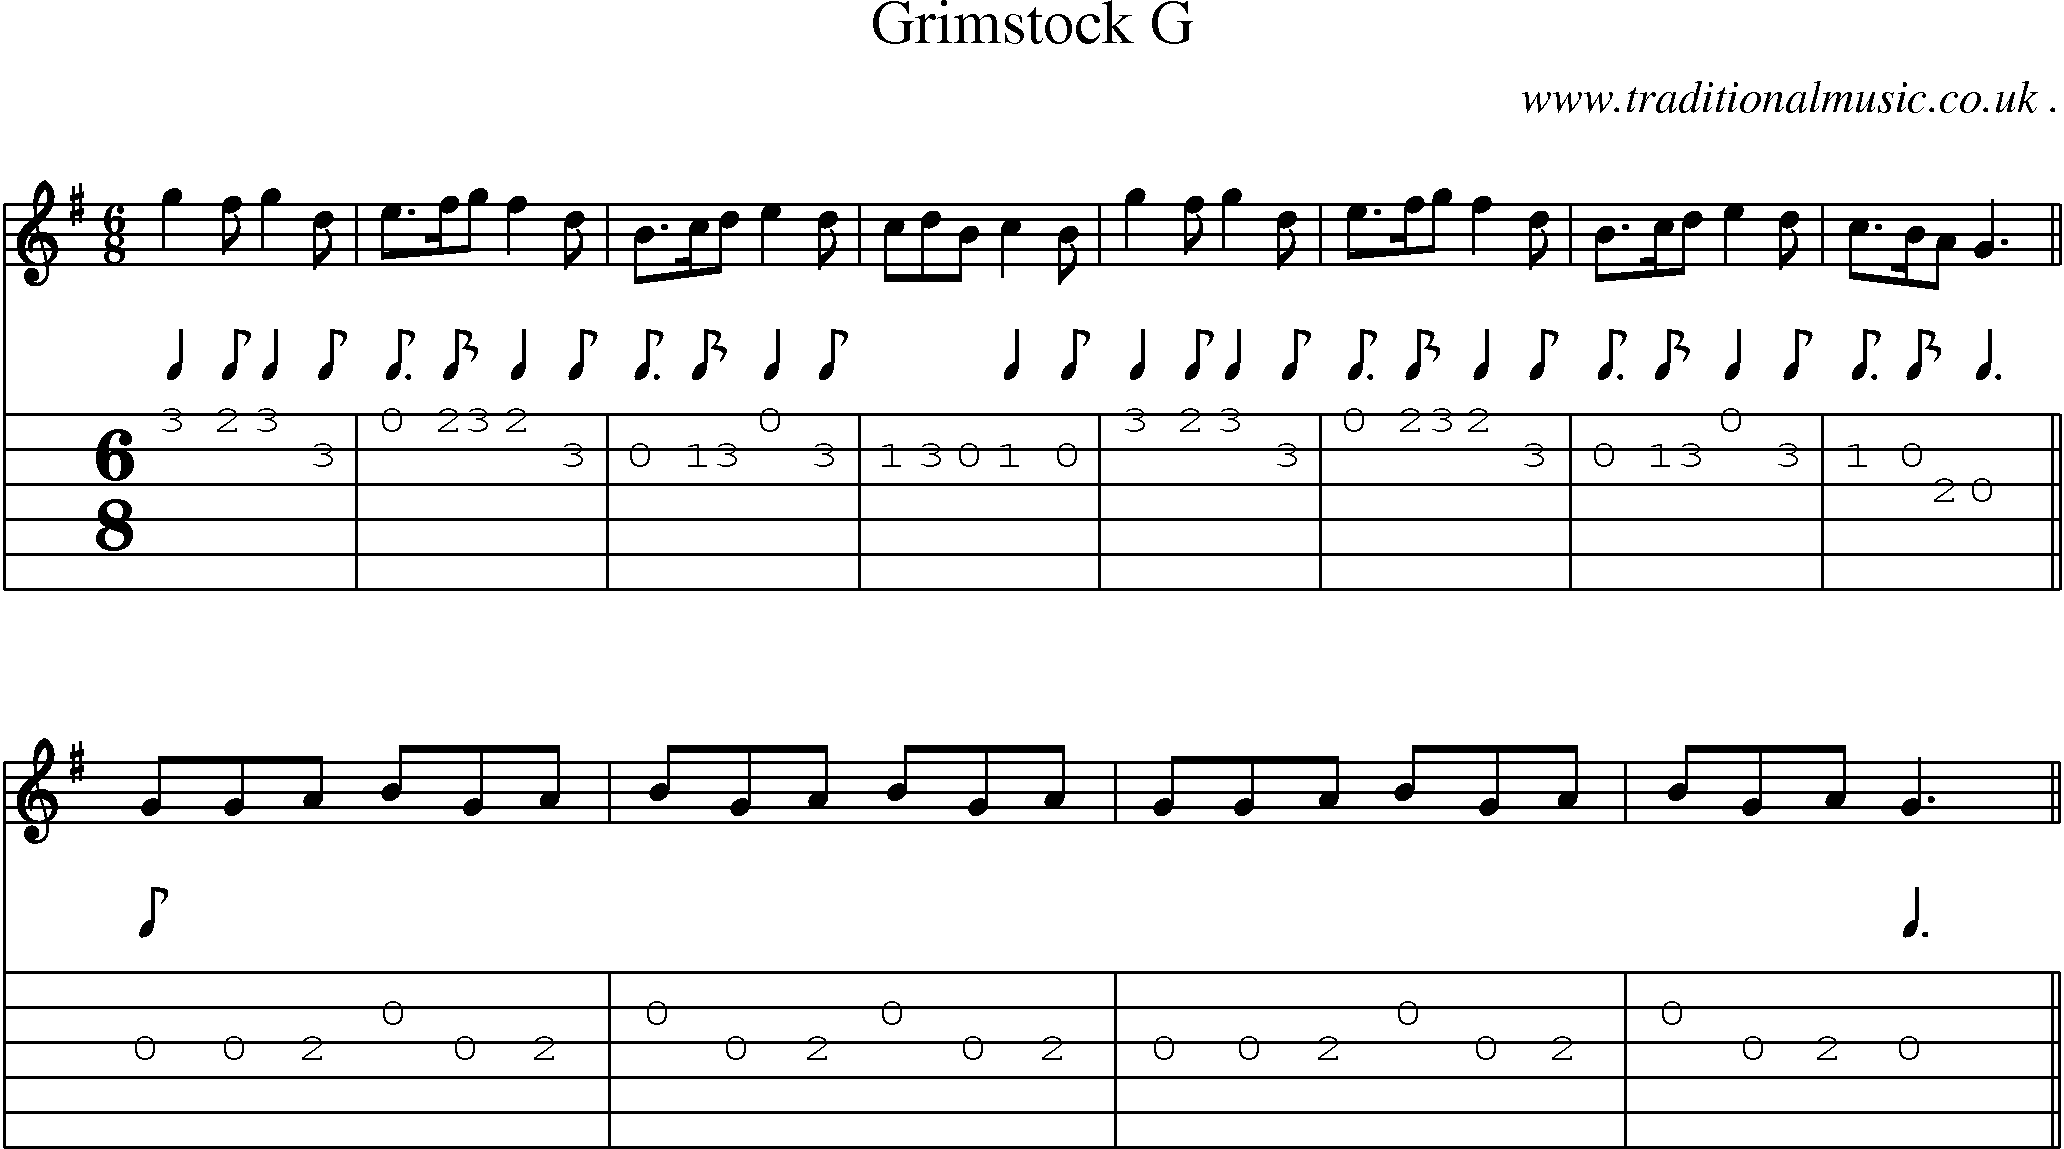 Sheet-Music and Guitar Tabs for Grimstock G